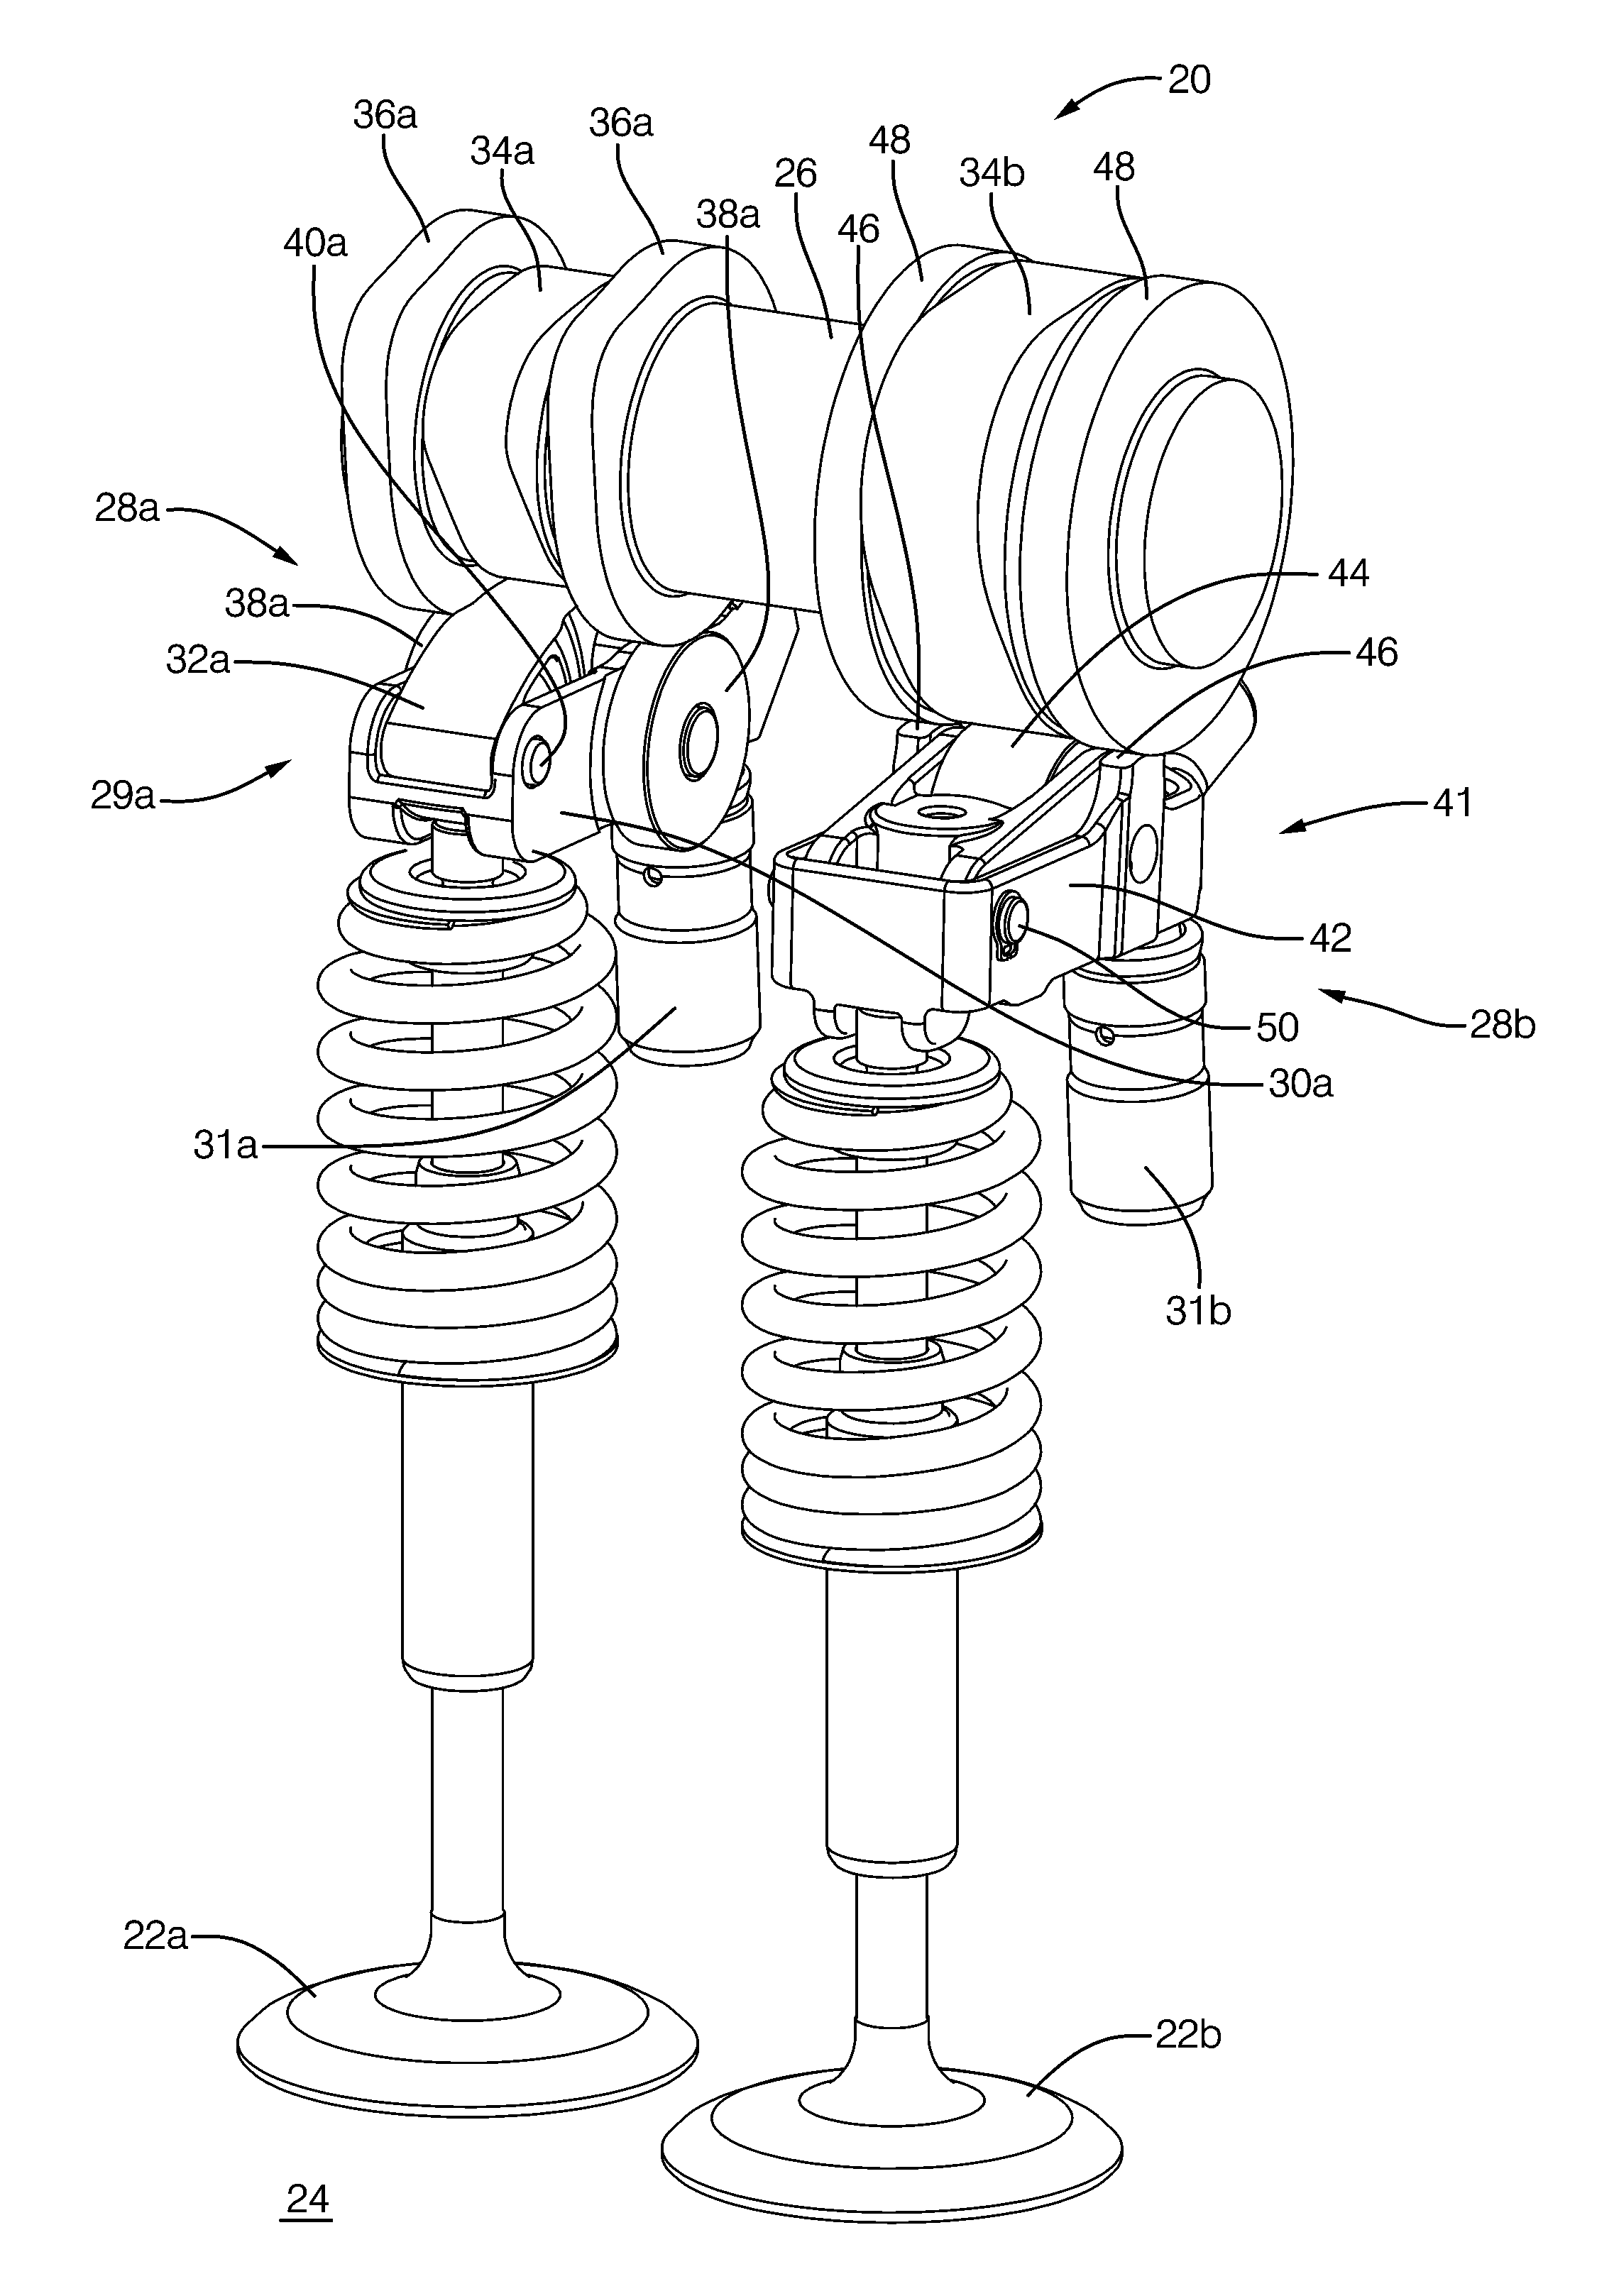 Dual intake valve system with one deactivation valve and one multi-lift valve for swirl enhancement